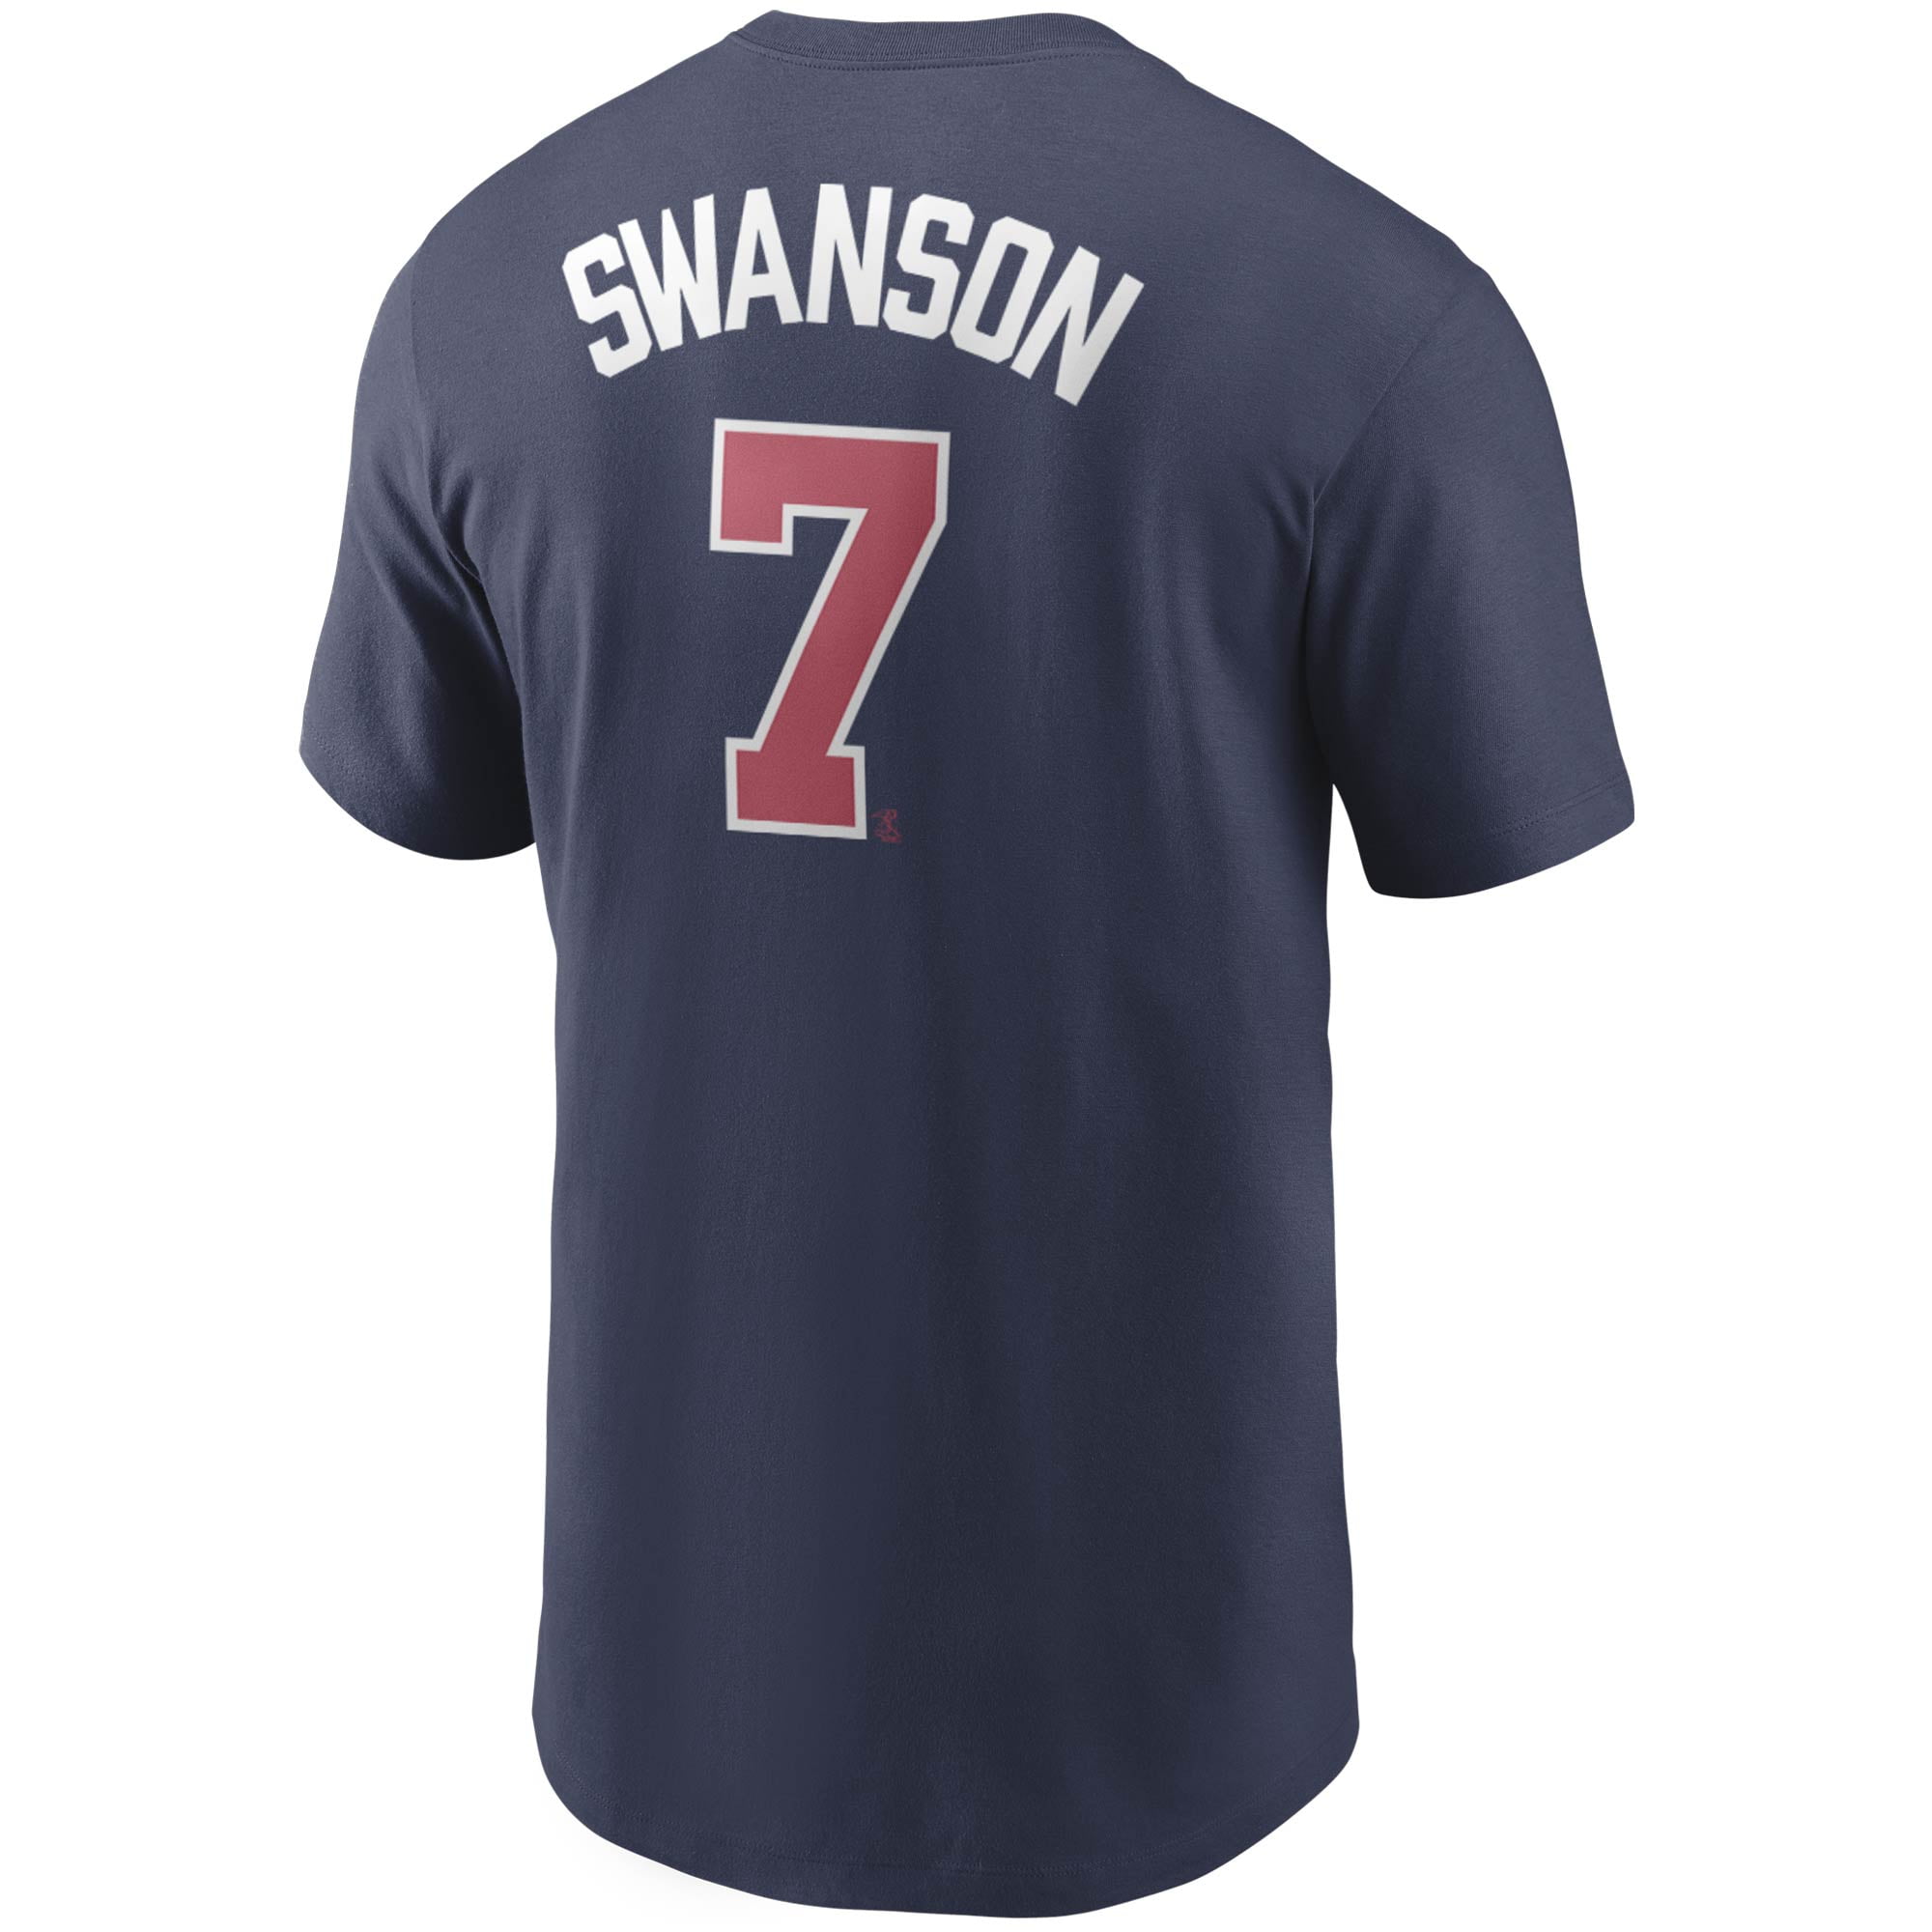 Atlanta Braves Dansby Swanson Name & Number Shirt Funny Navy Cotton Tee Gift Men